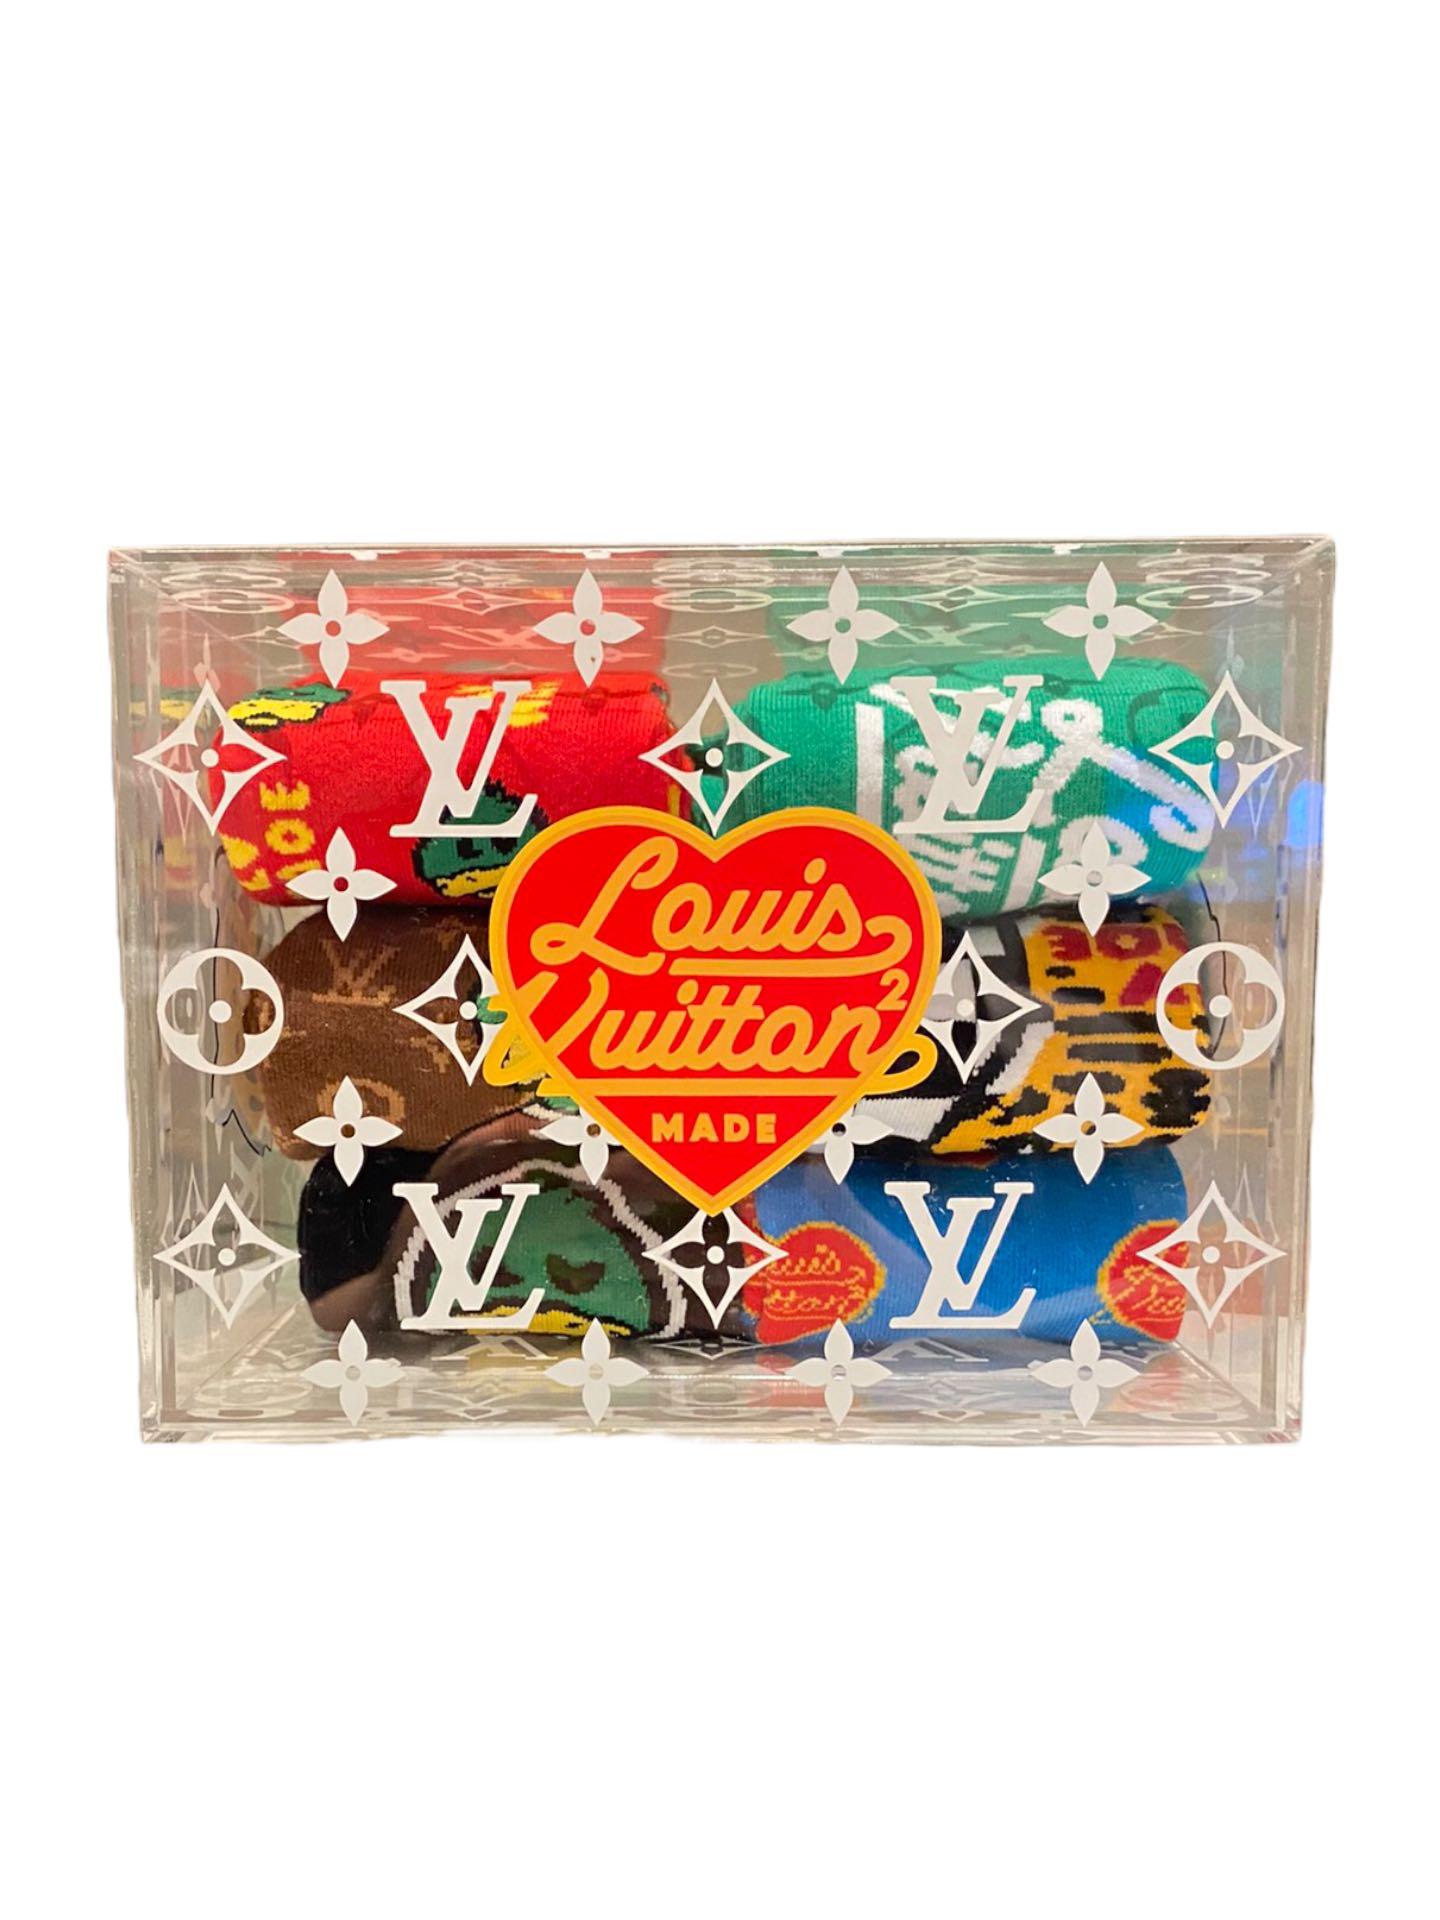 KOTJ   LOUIS VUITTON x NIGO HUMAN MADE An exclusive capsule release of  pieces from the sold out Nigo Human Made collaboration the first in Virgil  Ablohs tenure at the house